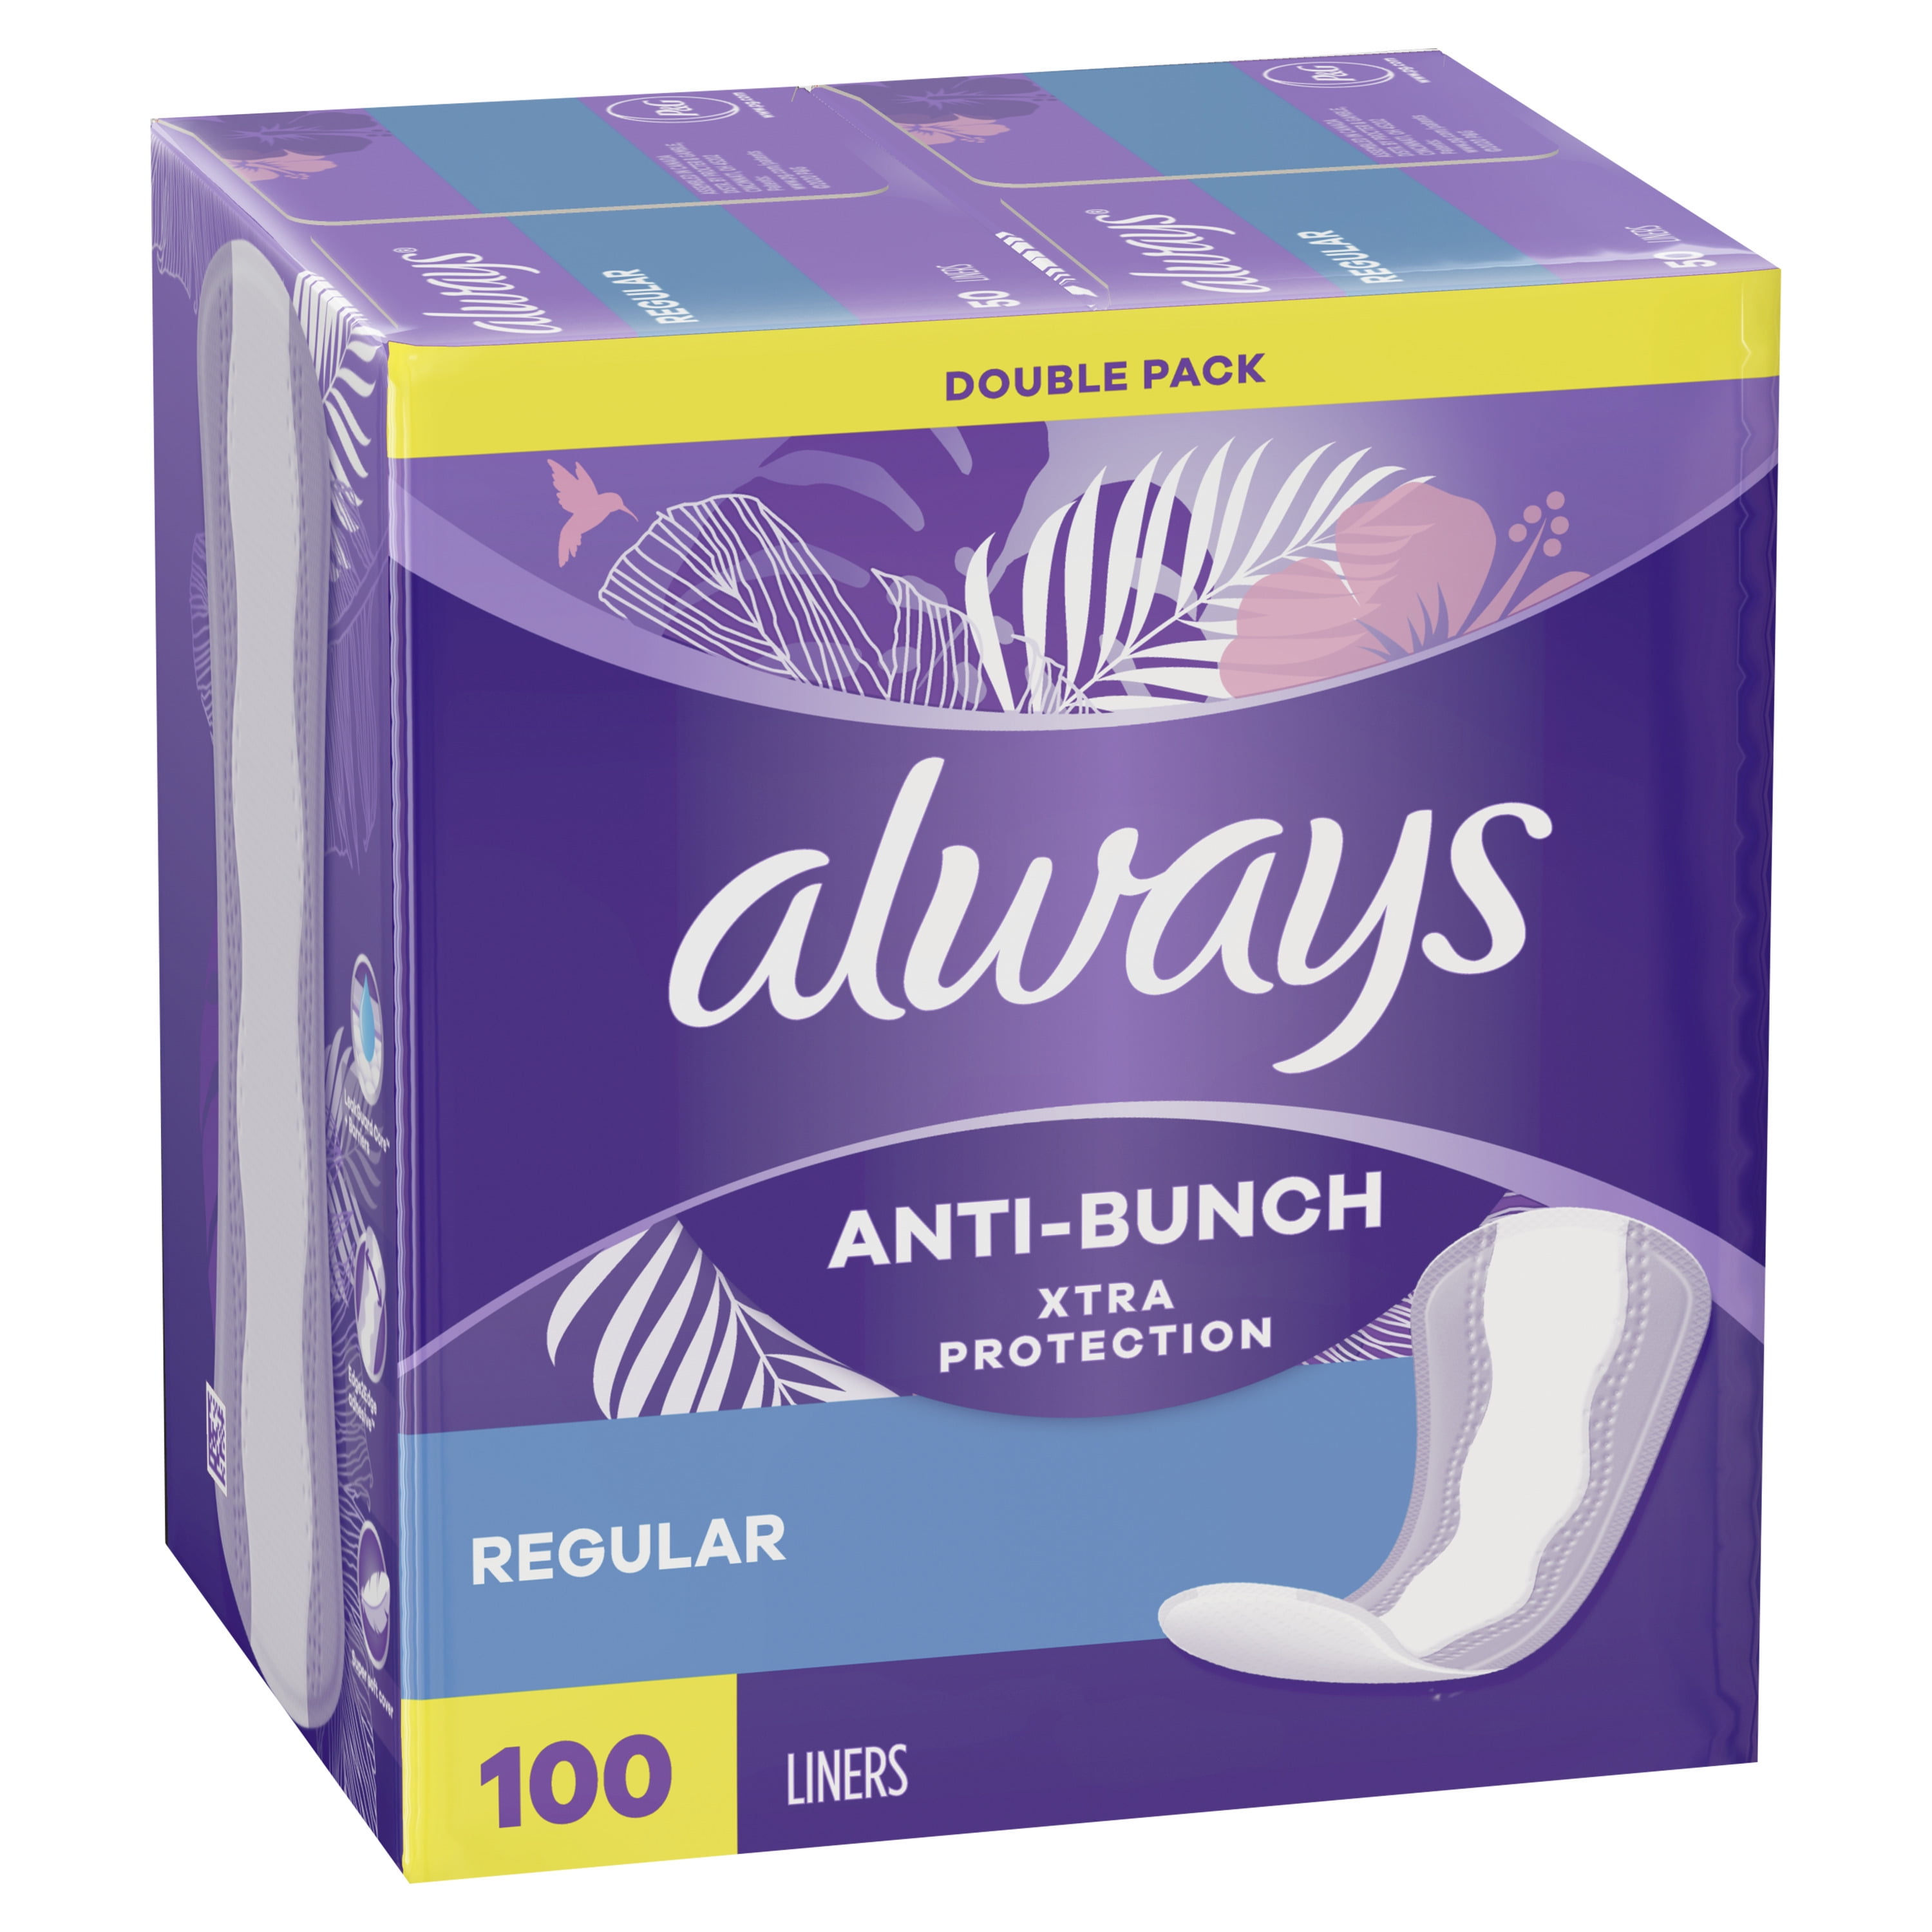 Always Anti-Bunch Xtra Protection, Panty Liners For Women, Light